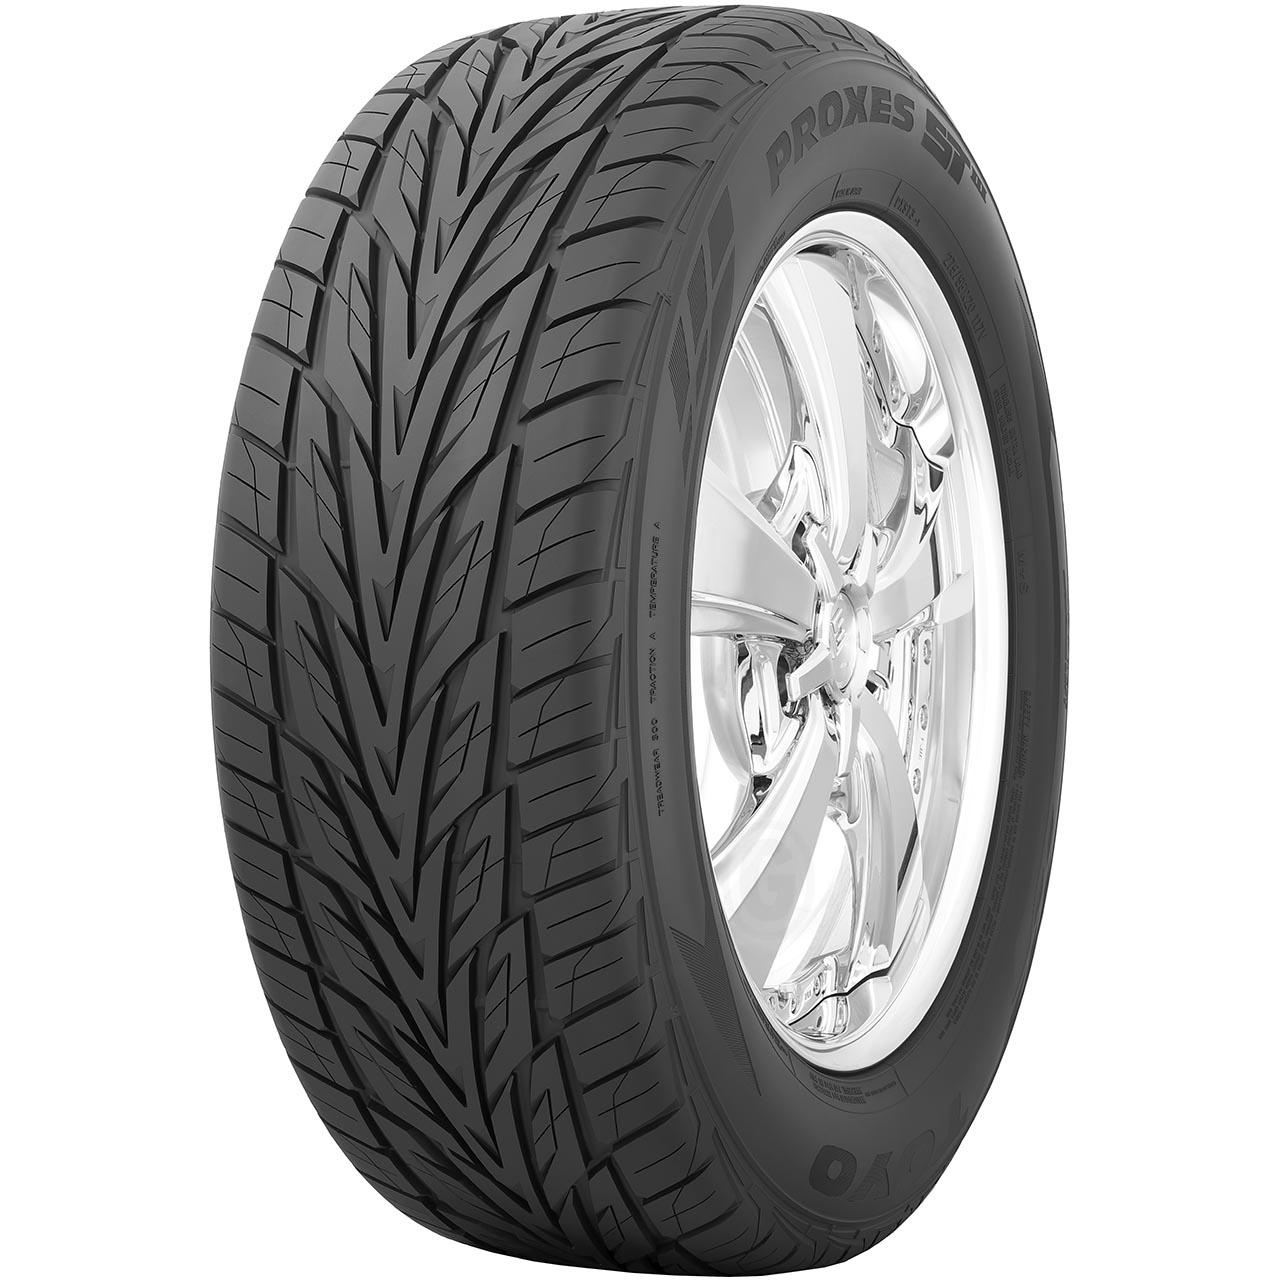 TOYO PROXES S/T III 255/55R18 109V